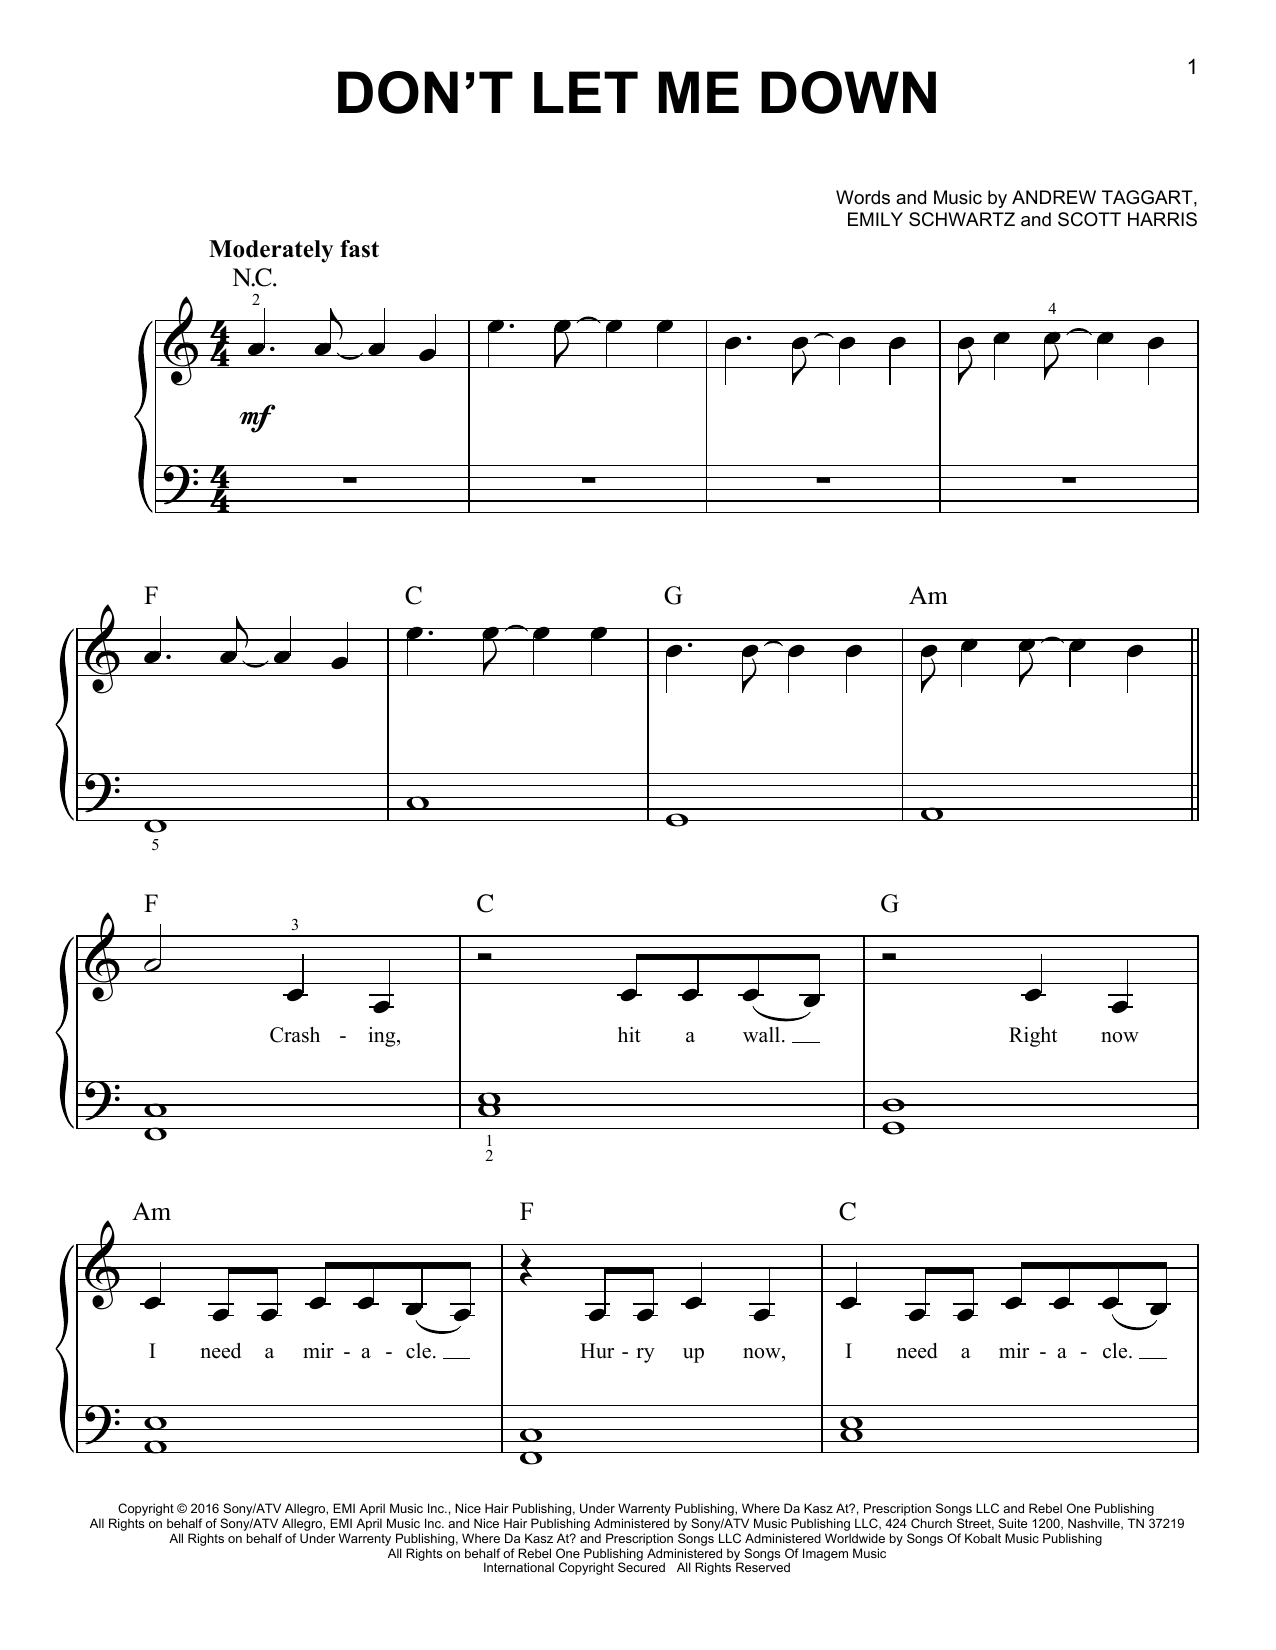 Download The Chainsmokers Don't Let Me Down (feat. Daya) Sheet Music